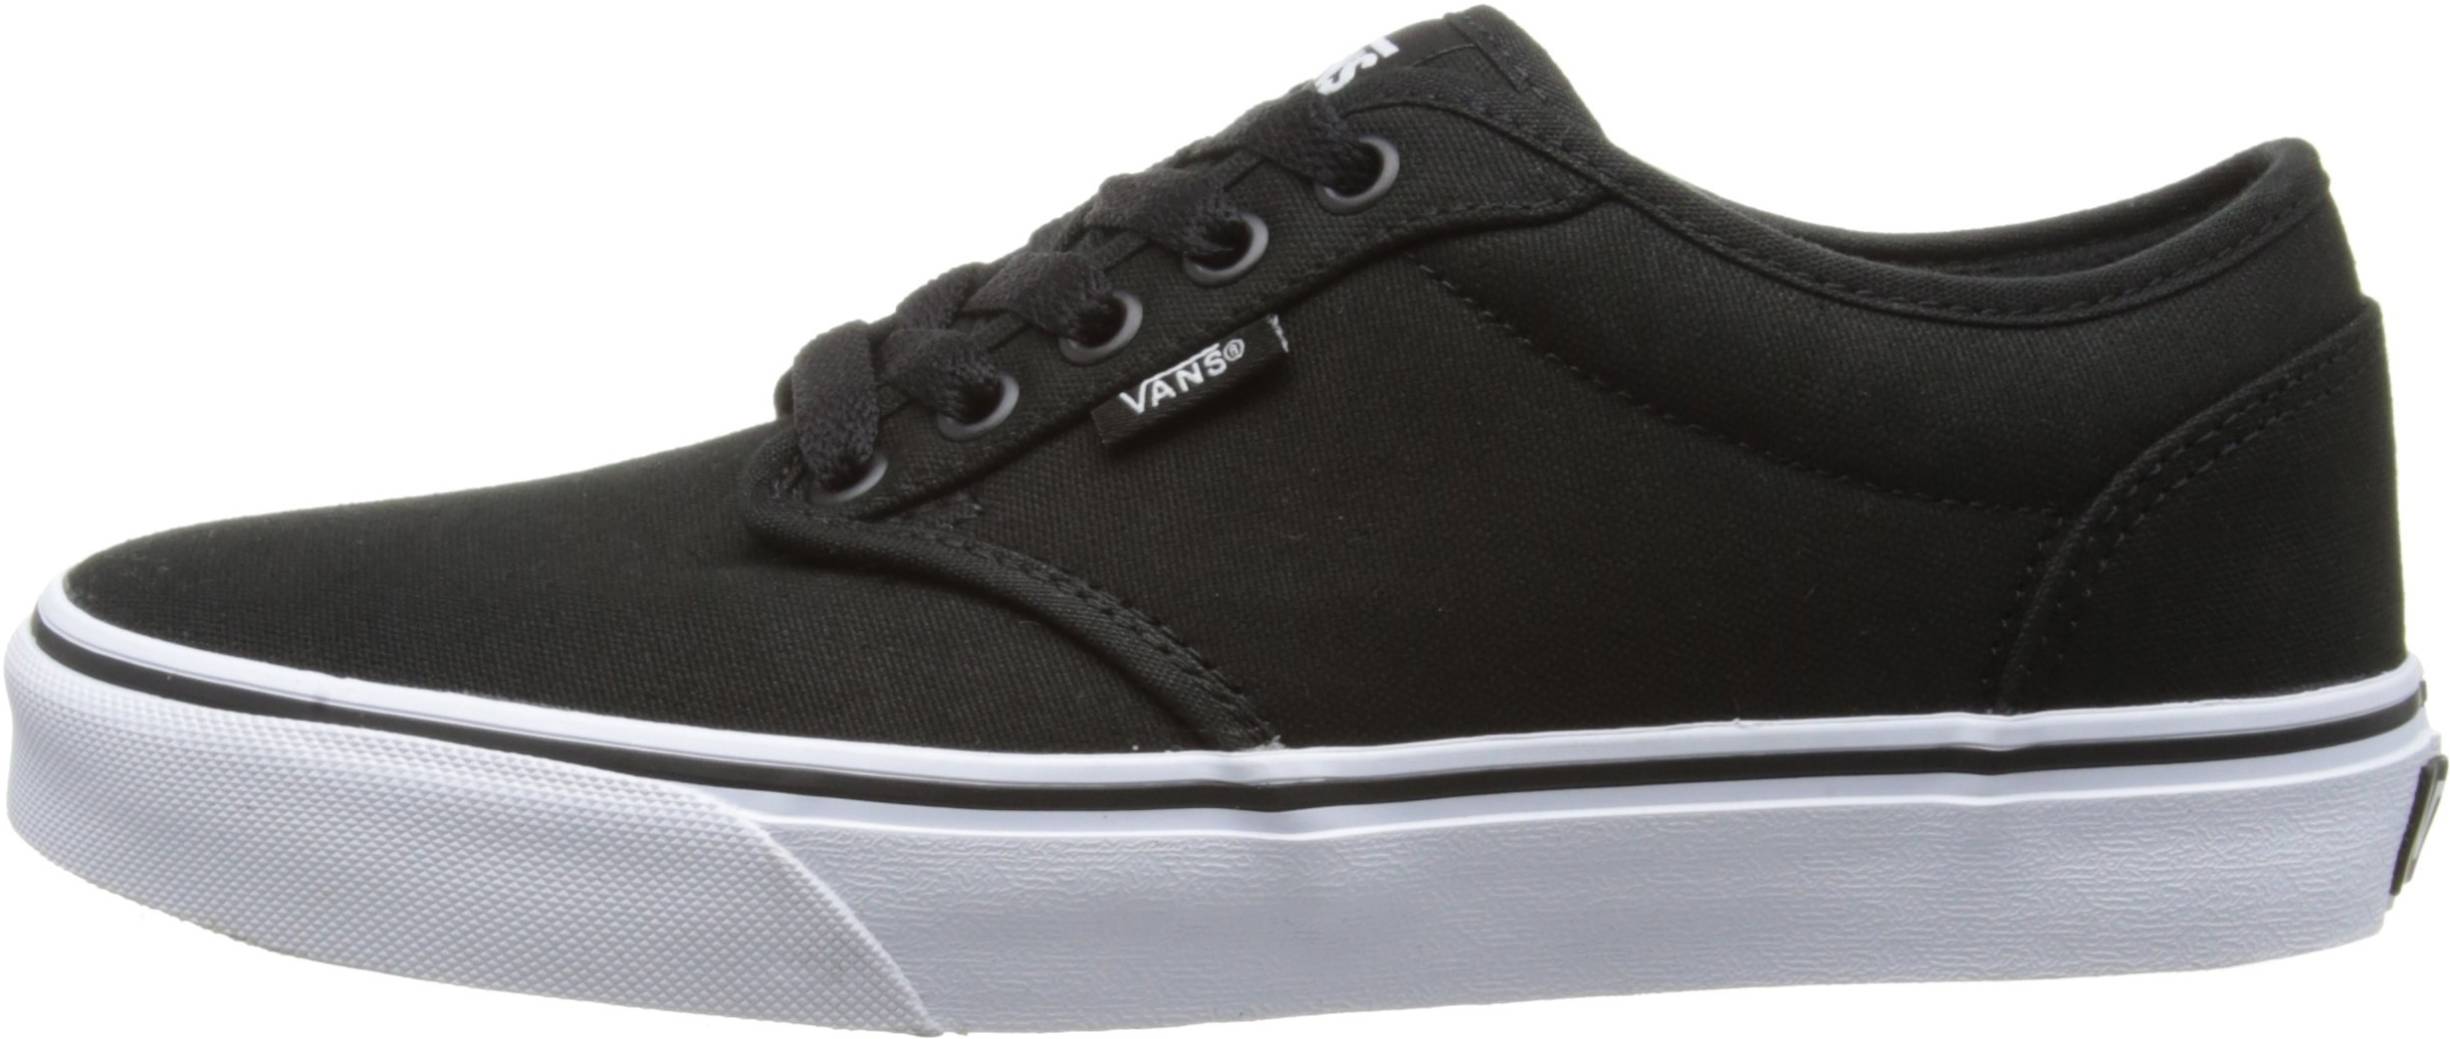 Only £35 + Review of Vans Atwood 